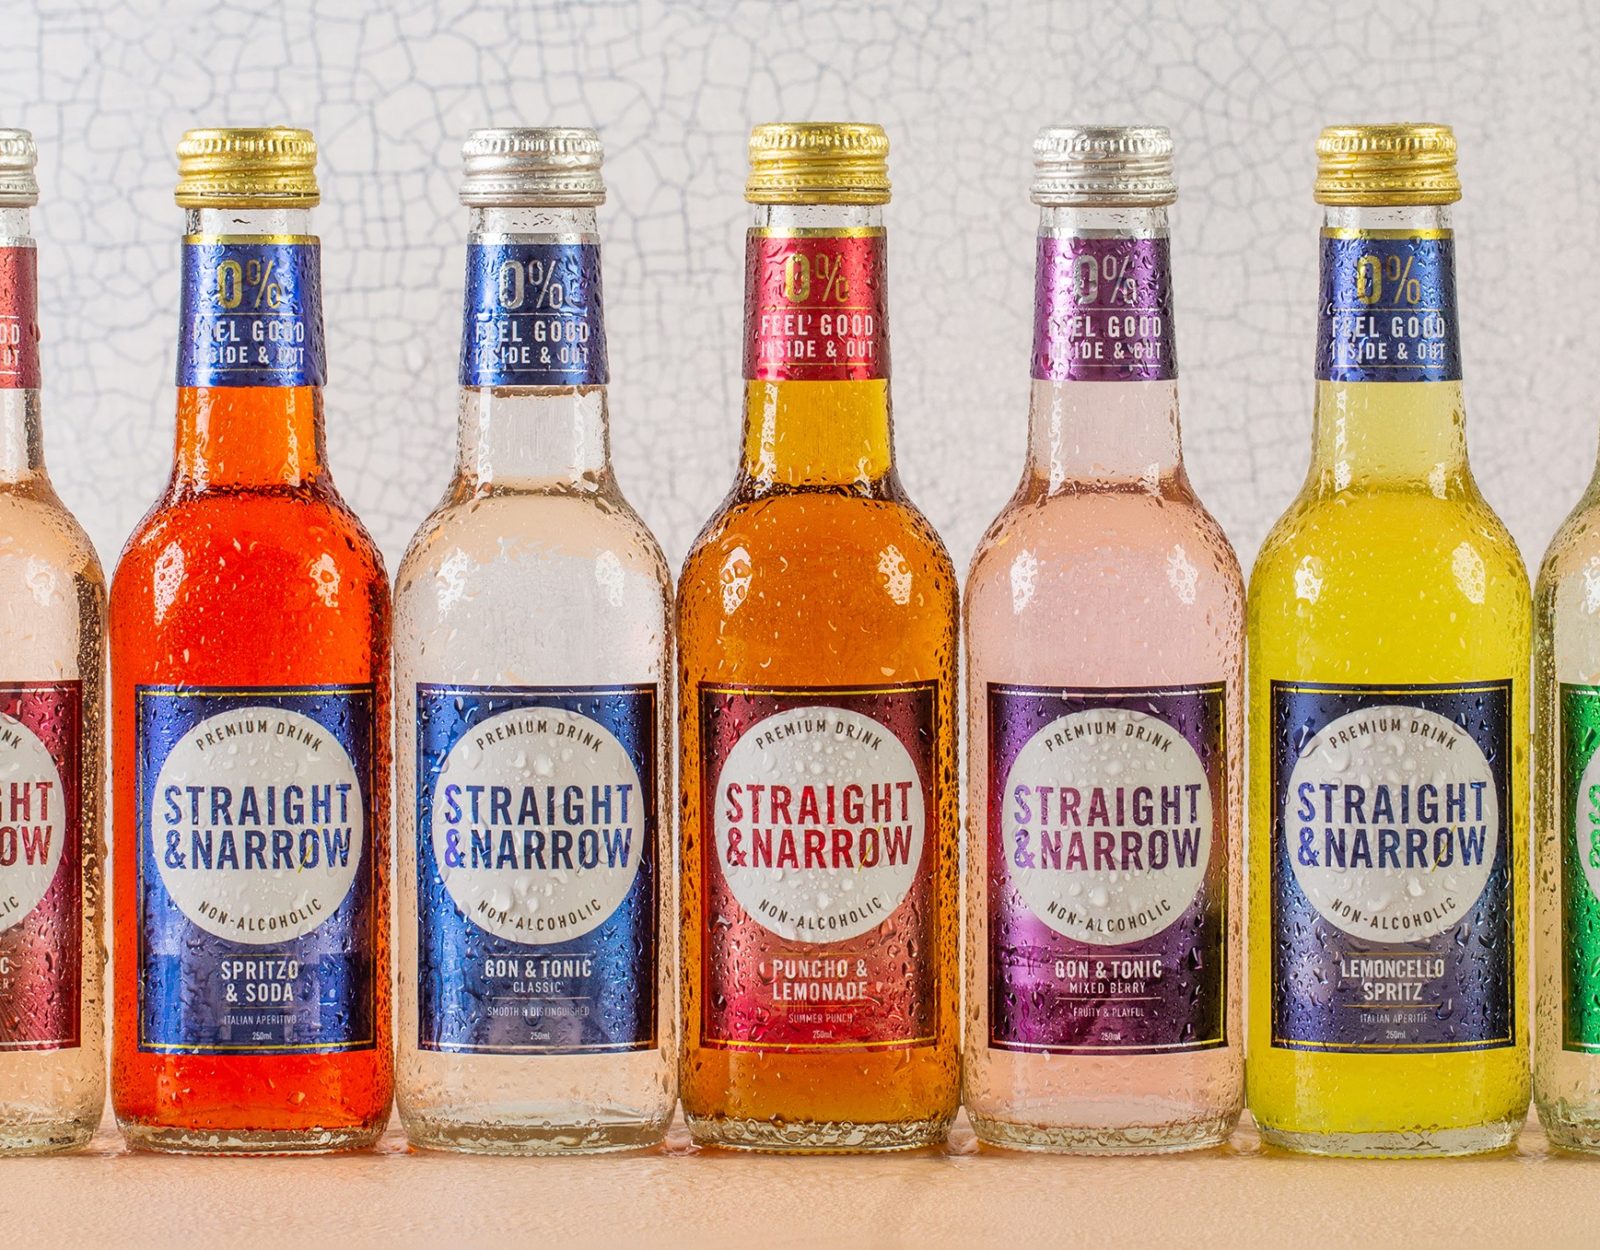 The Story Of Straight & Narrow | Packaging Design